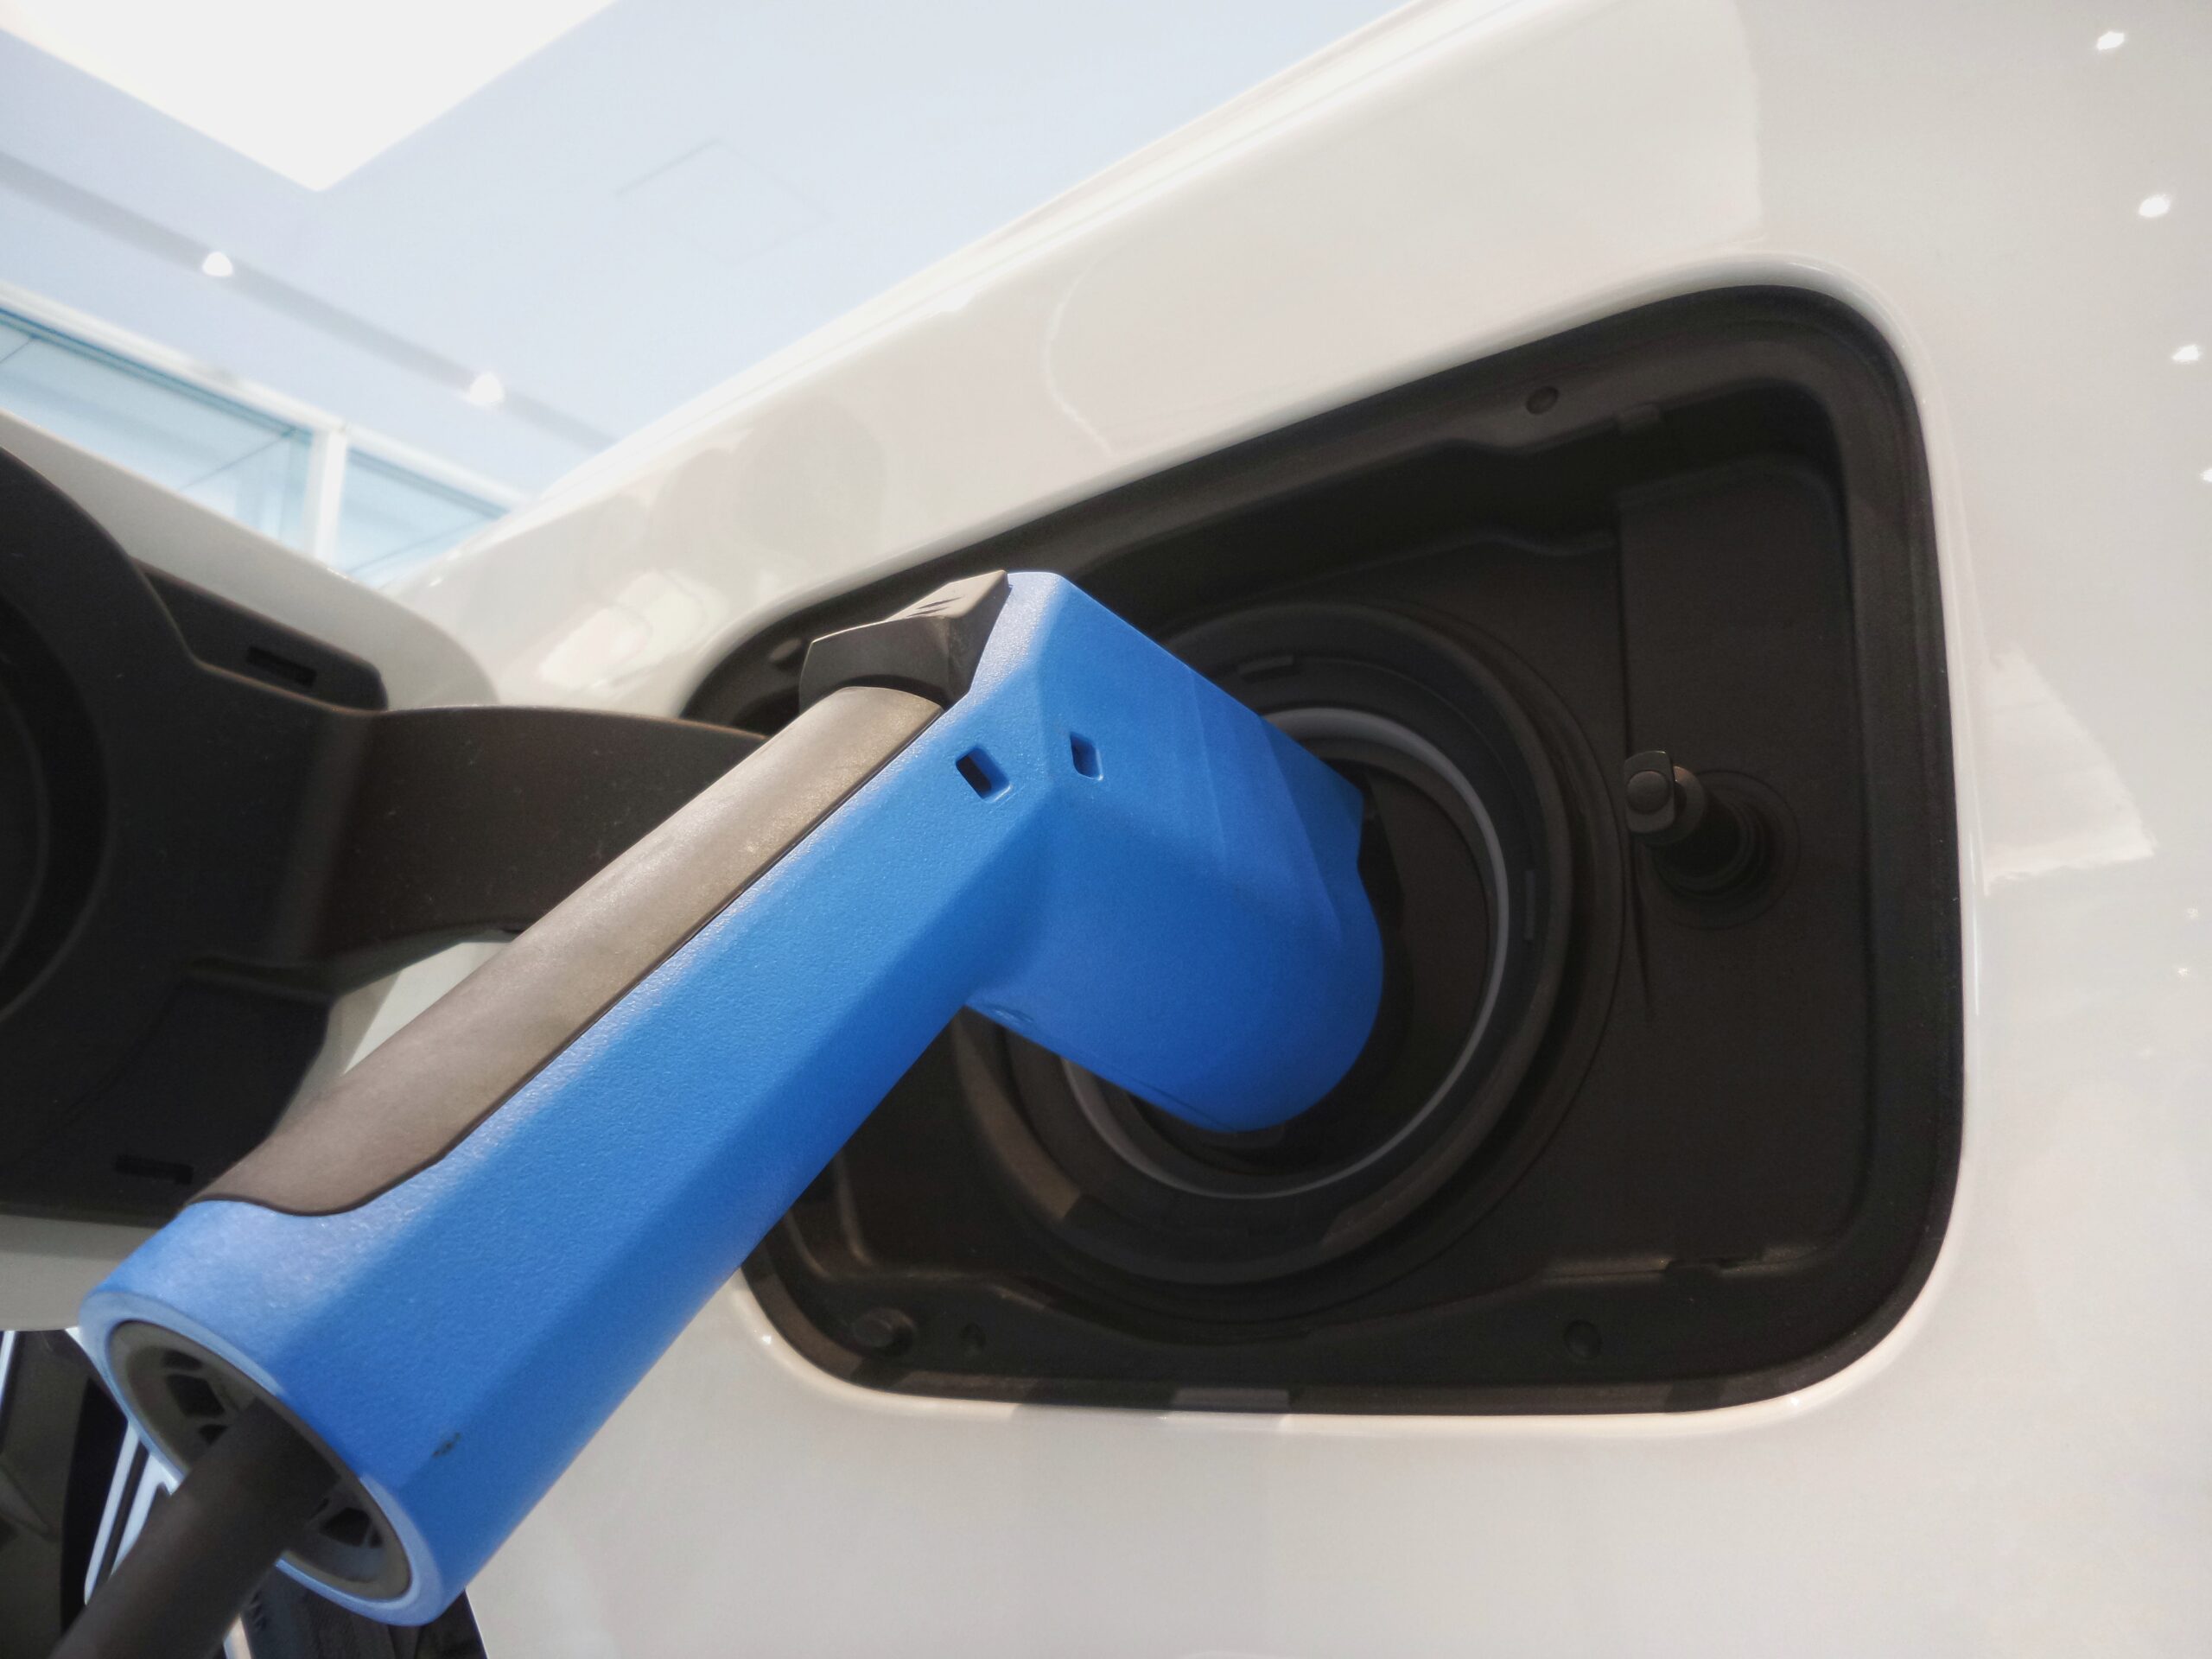 EV Chargers: A Key Component Of The Electric Vehicle Ecosystem